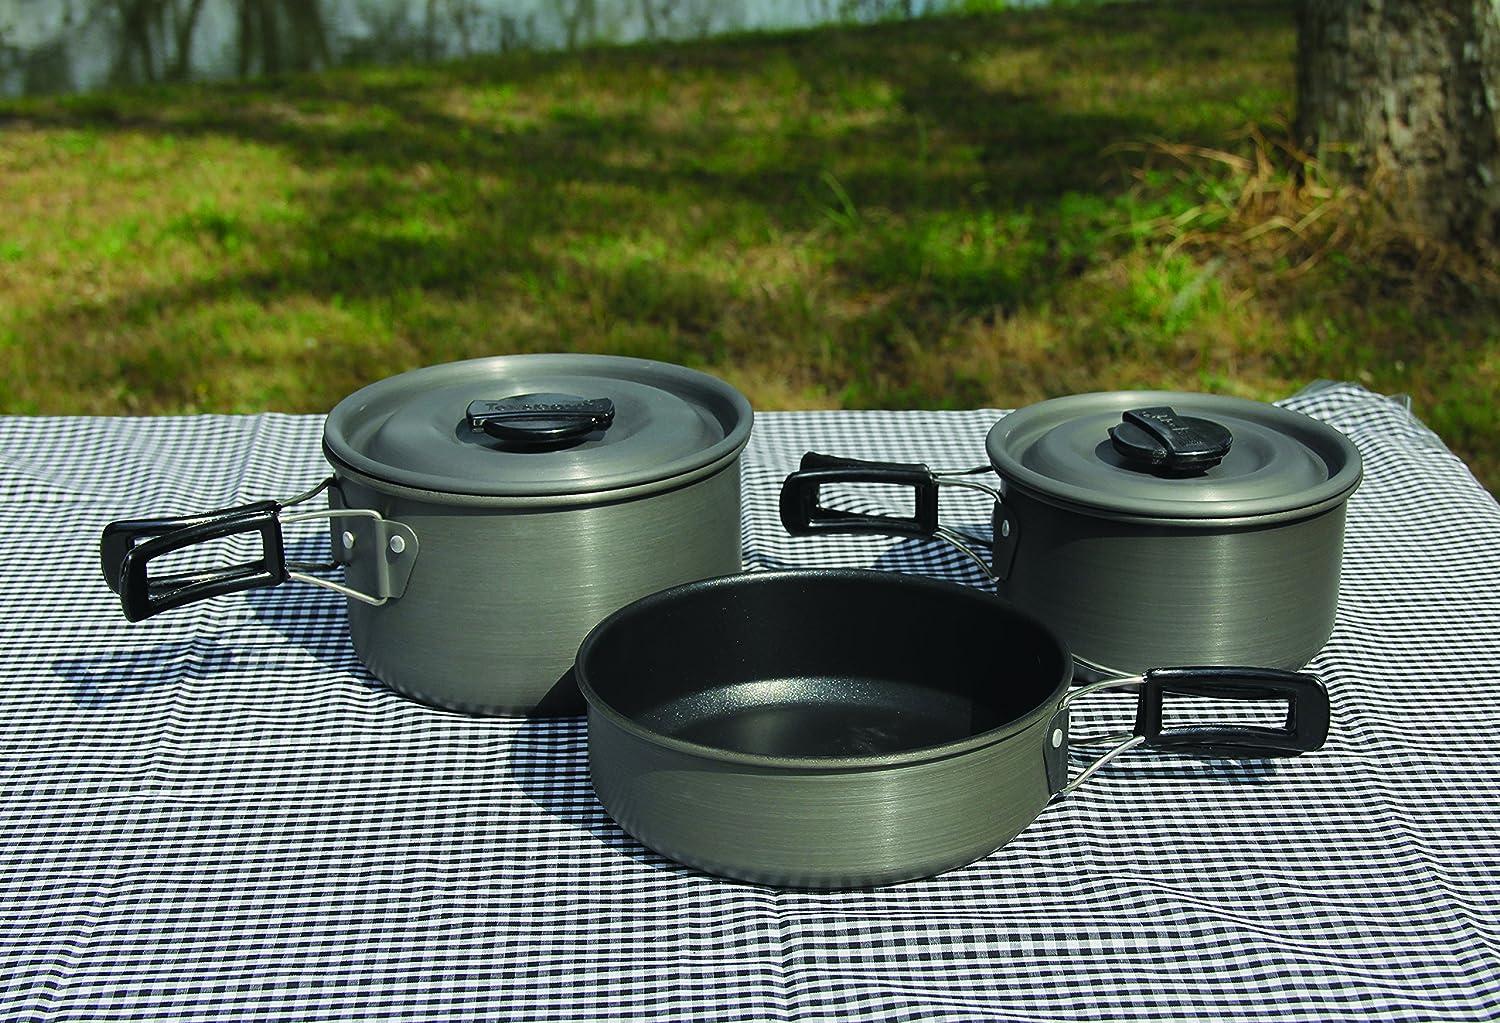 Nesting Pot & Pan for Camping With Foldable Handles -2 pieces